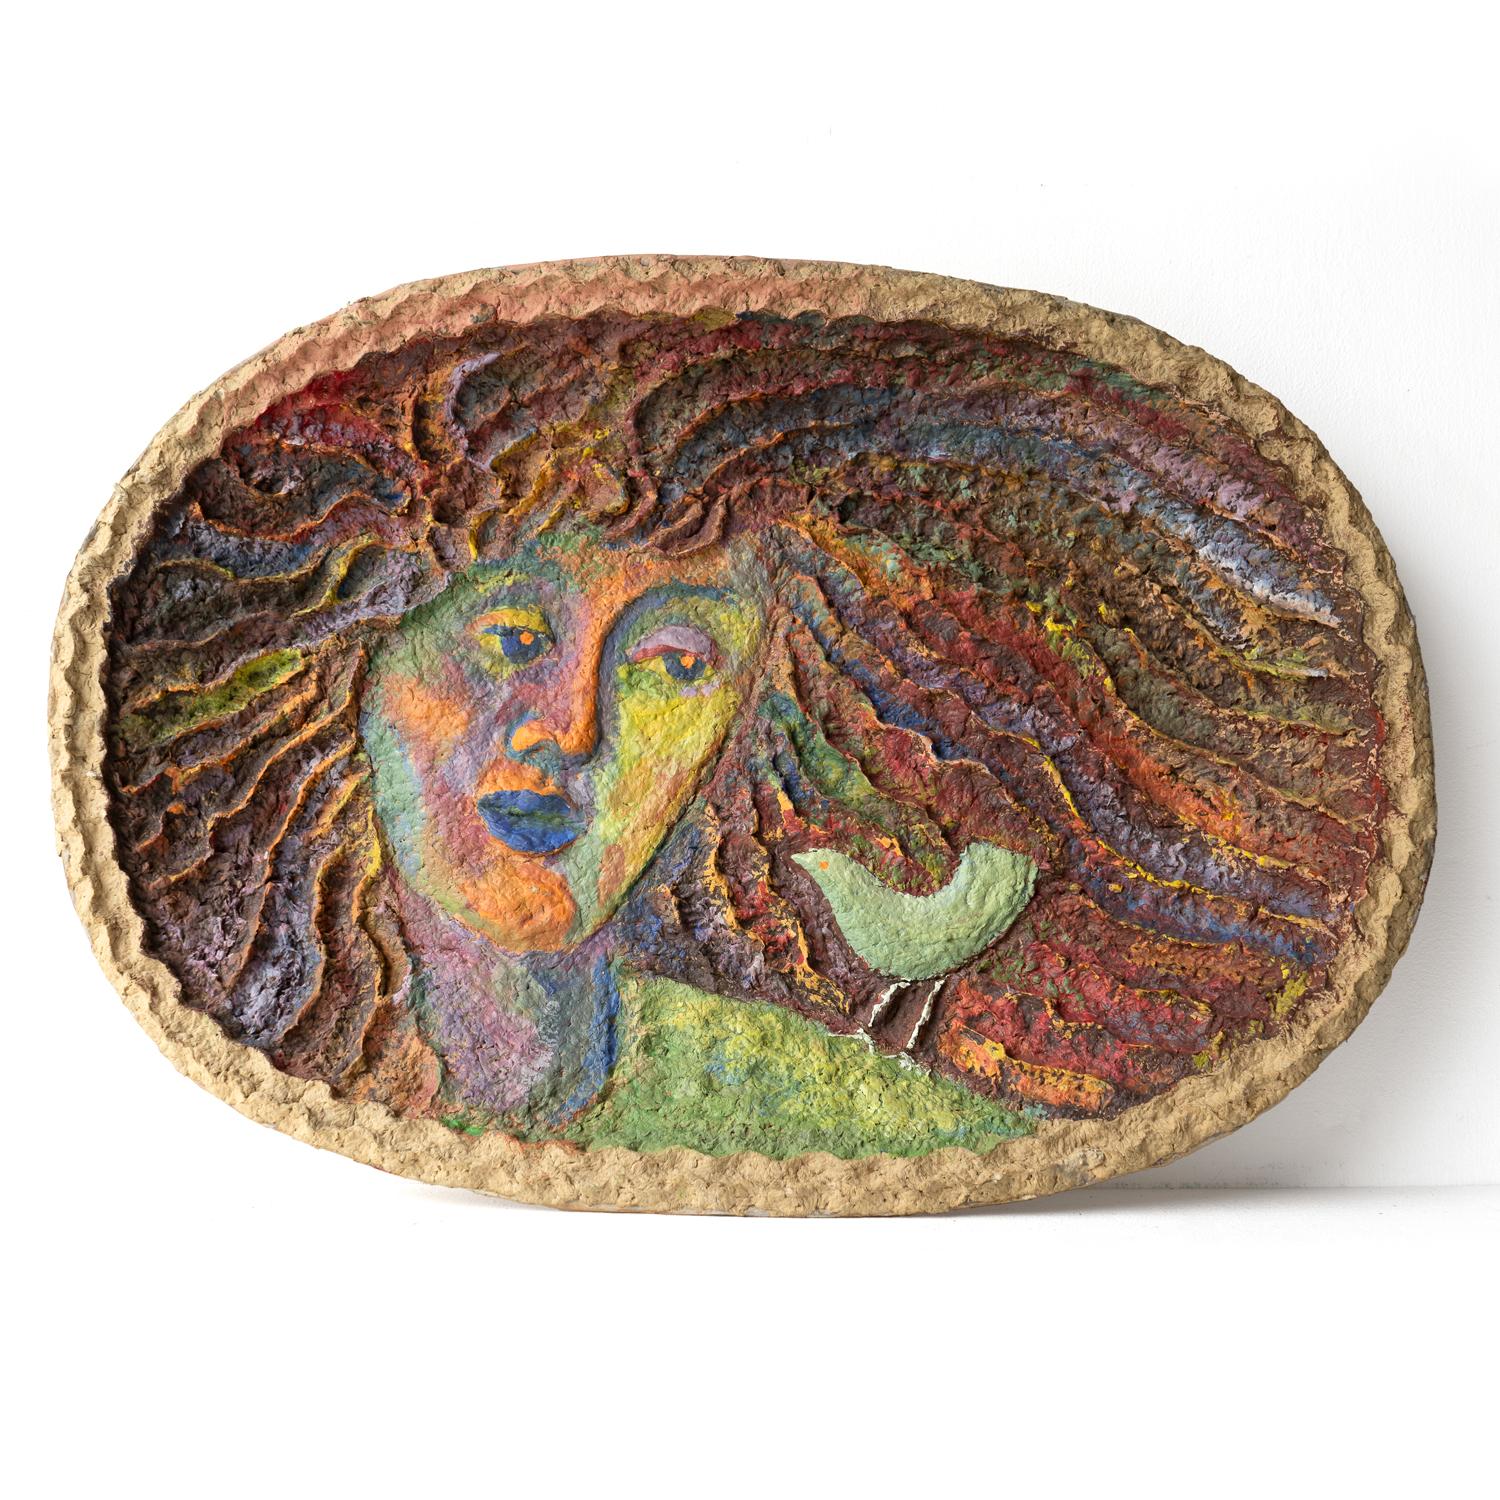 ORIGINAL HAND-PAINTED PAPER MACHE BOWL
Depicting a stylised woman with big hair looking at a bird perched on her shoulder.

Of three-dimensional form with a vibrant colour palette.

Unsigned and probably dating from the mid-late 20th century period